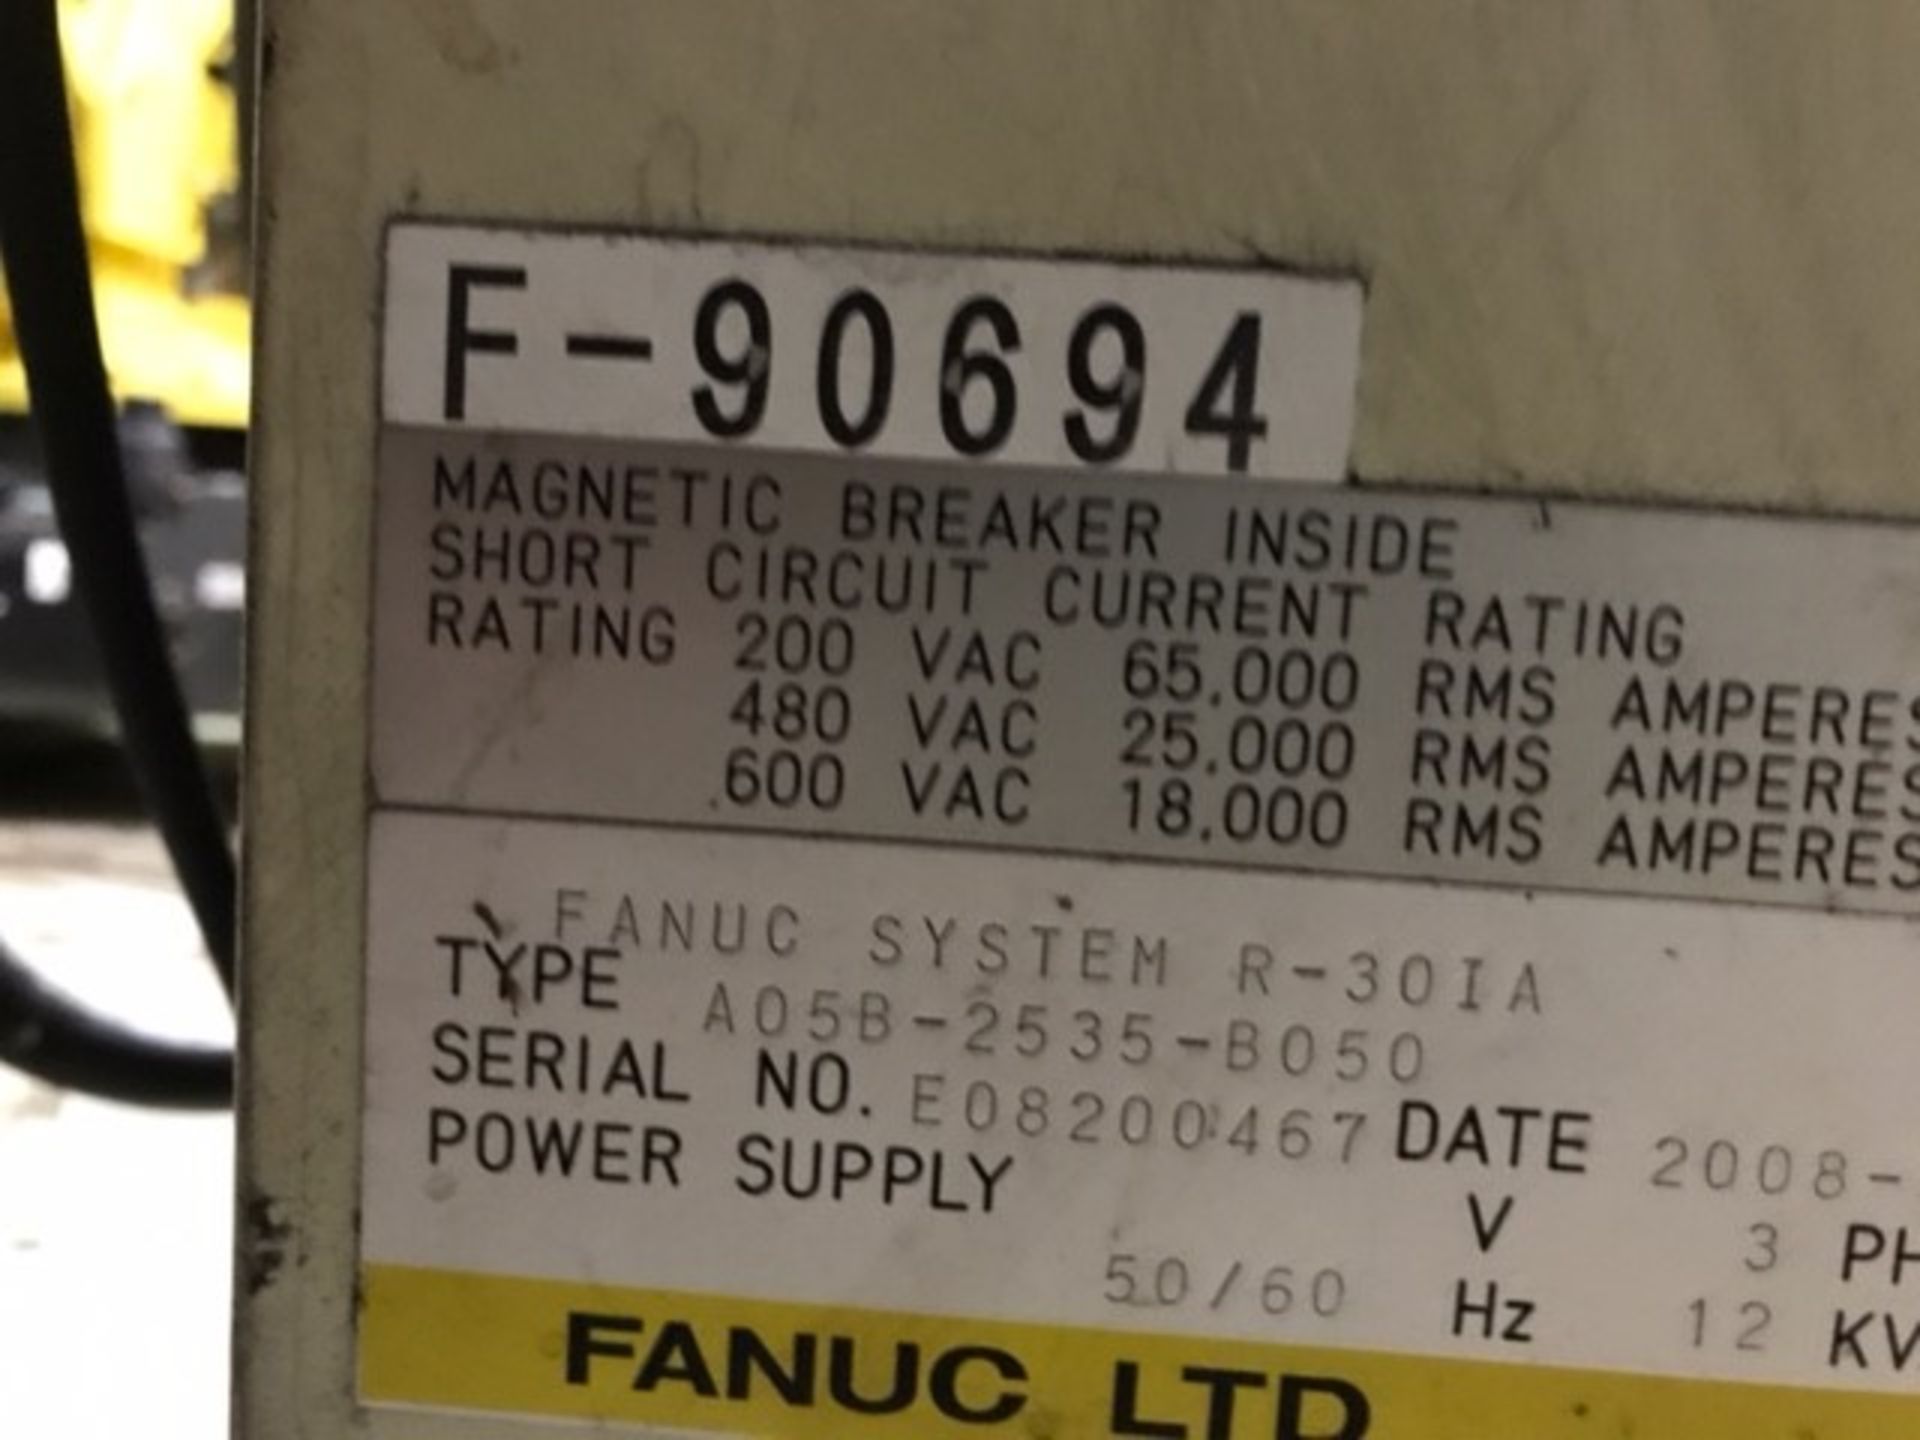 FANUC R2000iB/210F WITH R-30iA CONTROLS, YEAR 2008, SN 90695/90694, TEACH AND CABLES, LOCATION MI - Image 9 of 9